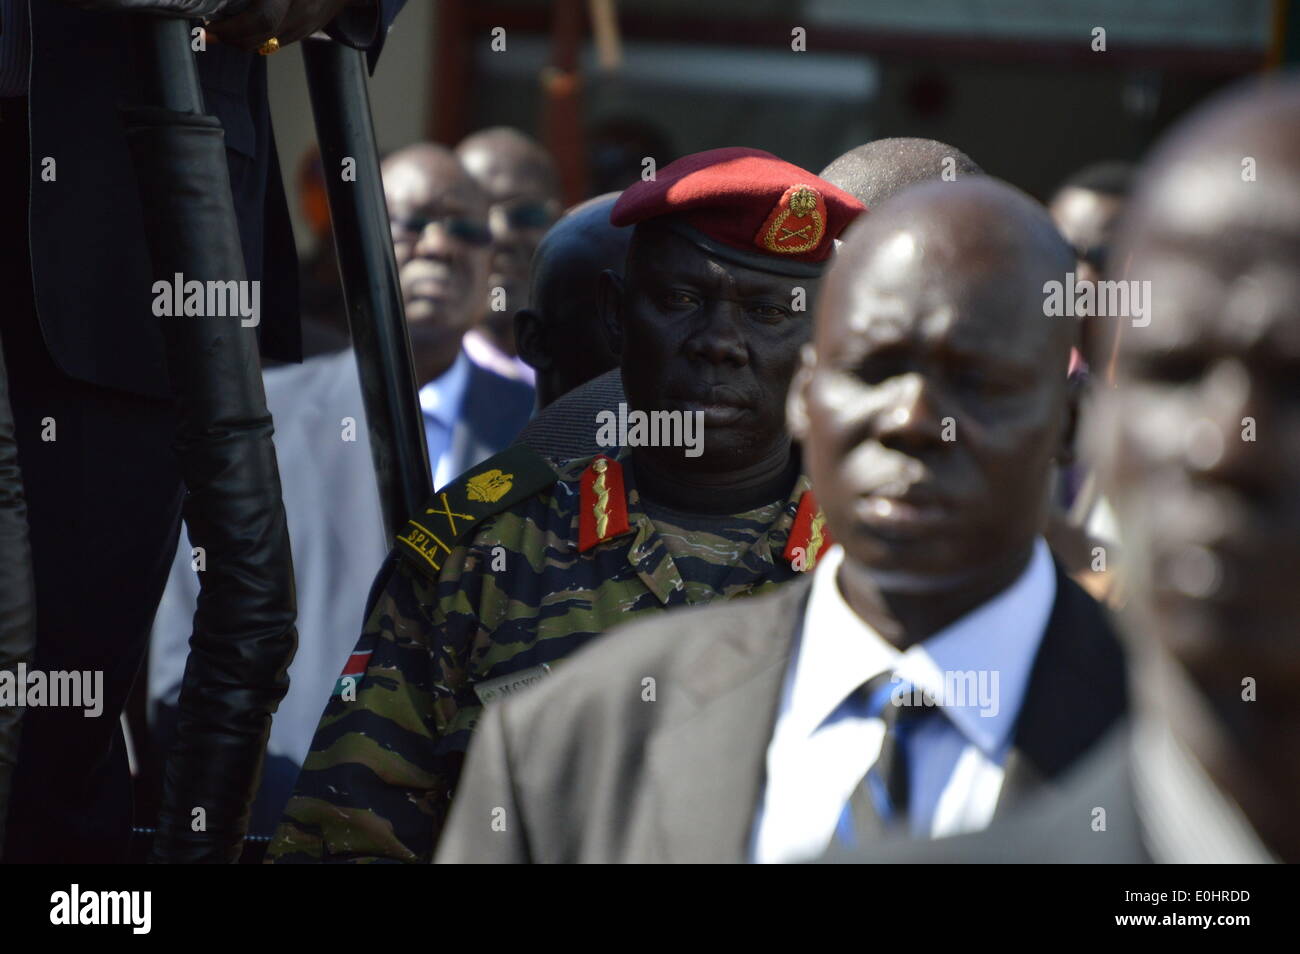 May 11, 2014 - Juba, South Sudan, Africa - the Sudan People's Liberation Movement (SPLM) Major General MARIAL CIENNOUNG (red cap), commander of the Presidential Guard (The Tiger Battalion). The Tiger Battalion also known as the Presidential Republican Guards in South Sudan during the visit of president S. Kiir from Kenya. The commander of the Tiger Battalion Major General Marial Chanuong Yol Mangok AND general Peter Gadet from the rebels side, have been named by the United States government as the first South Sudanese to face US sanctions. Last month the US President authorized his cabinet off Stock Photo